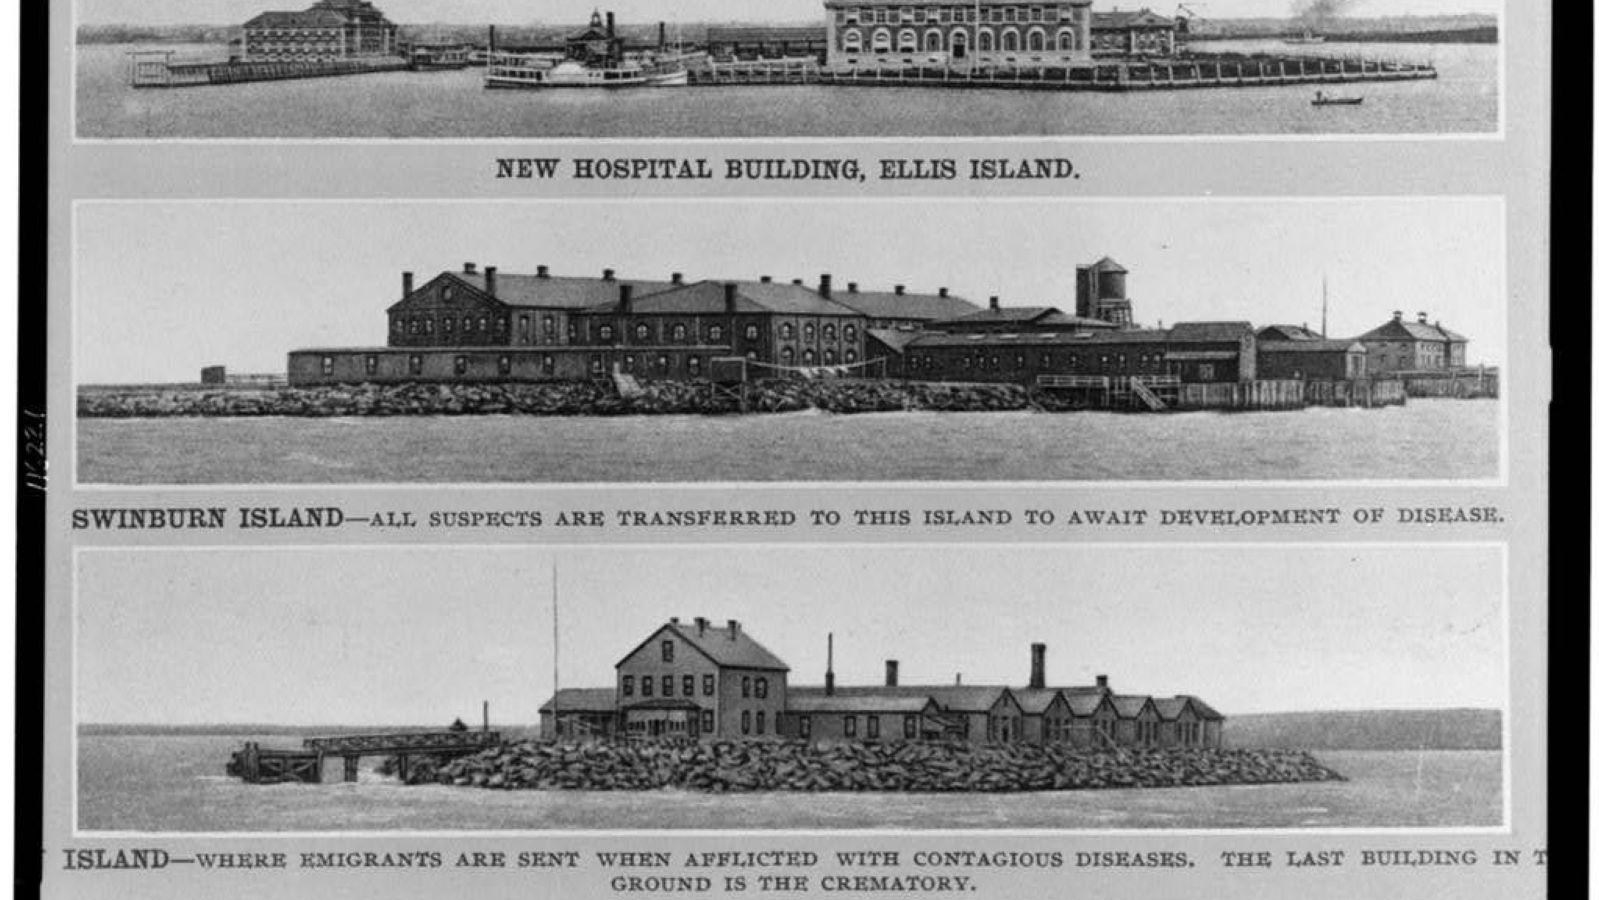 Images of three buildings used as quarantine hospitals in NYC.